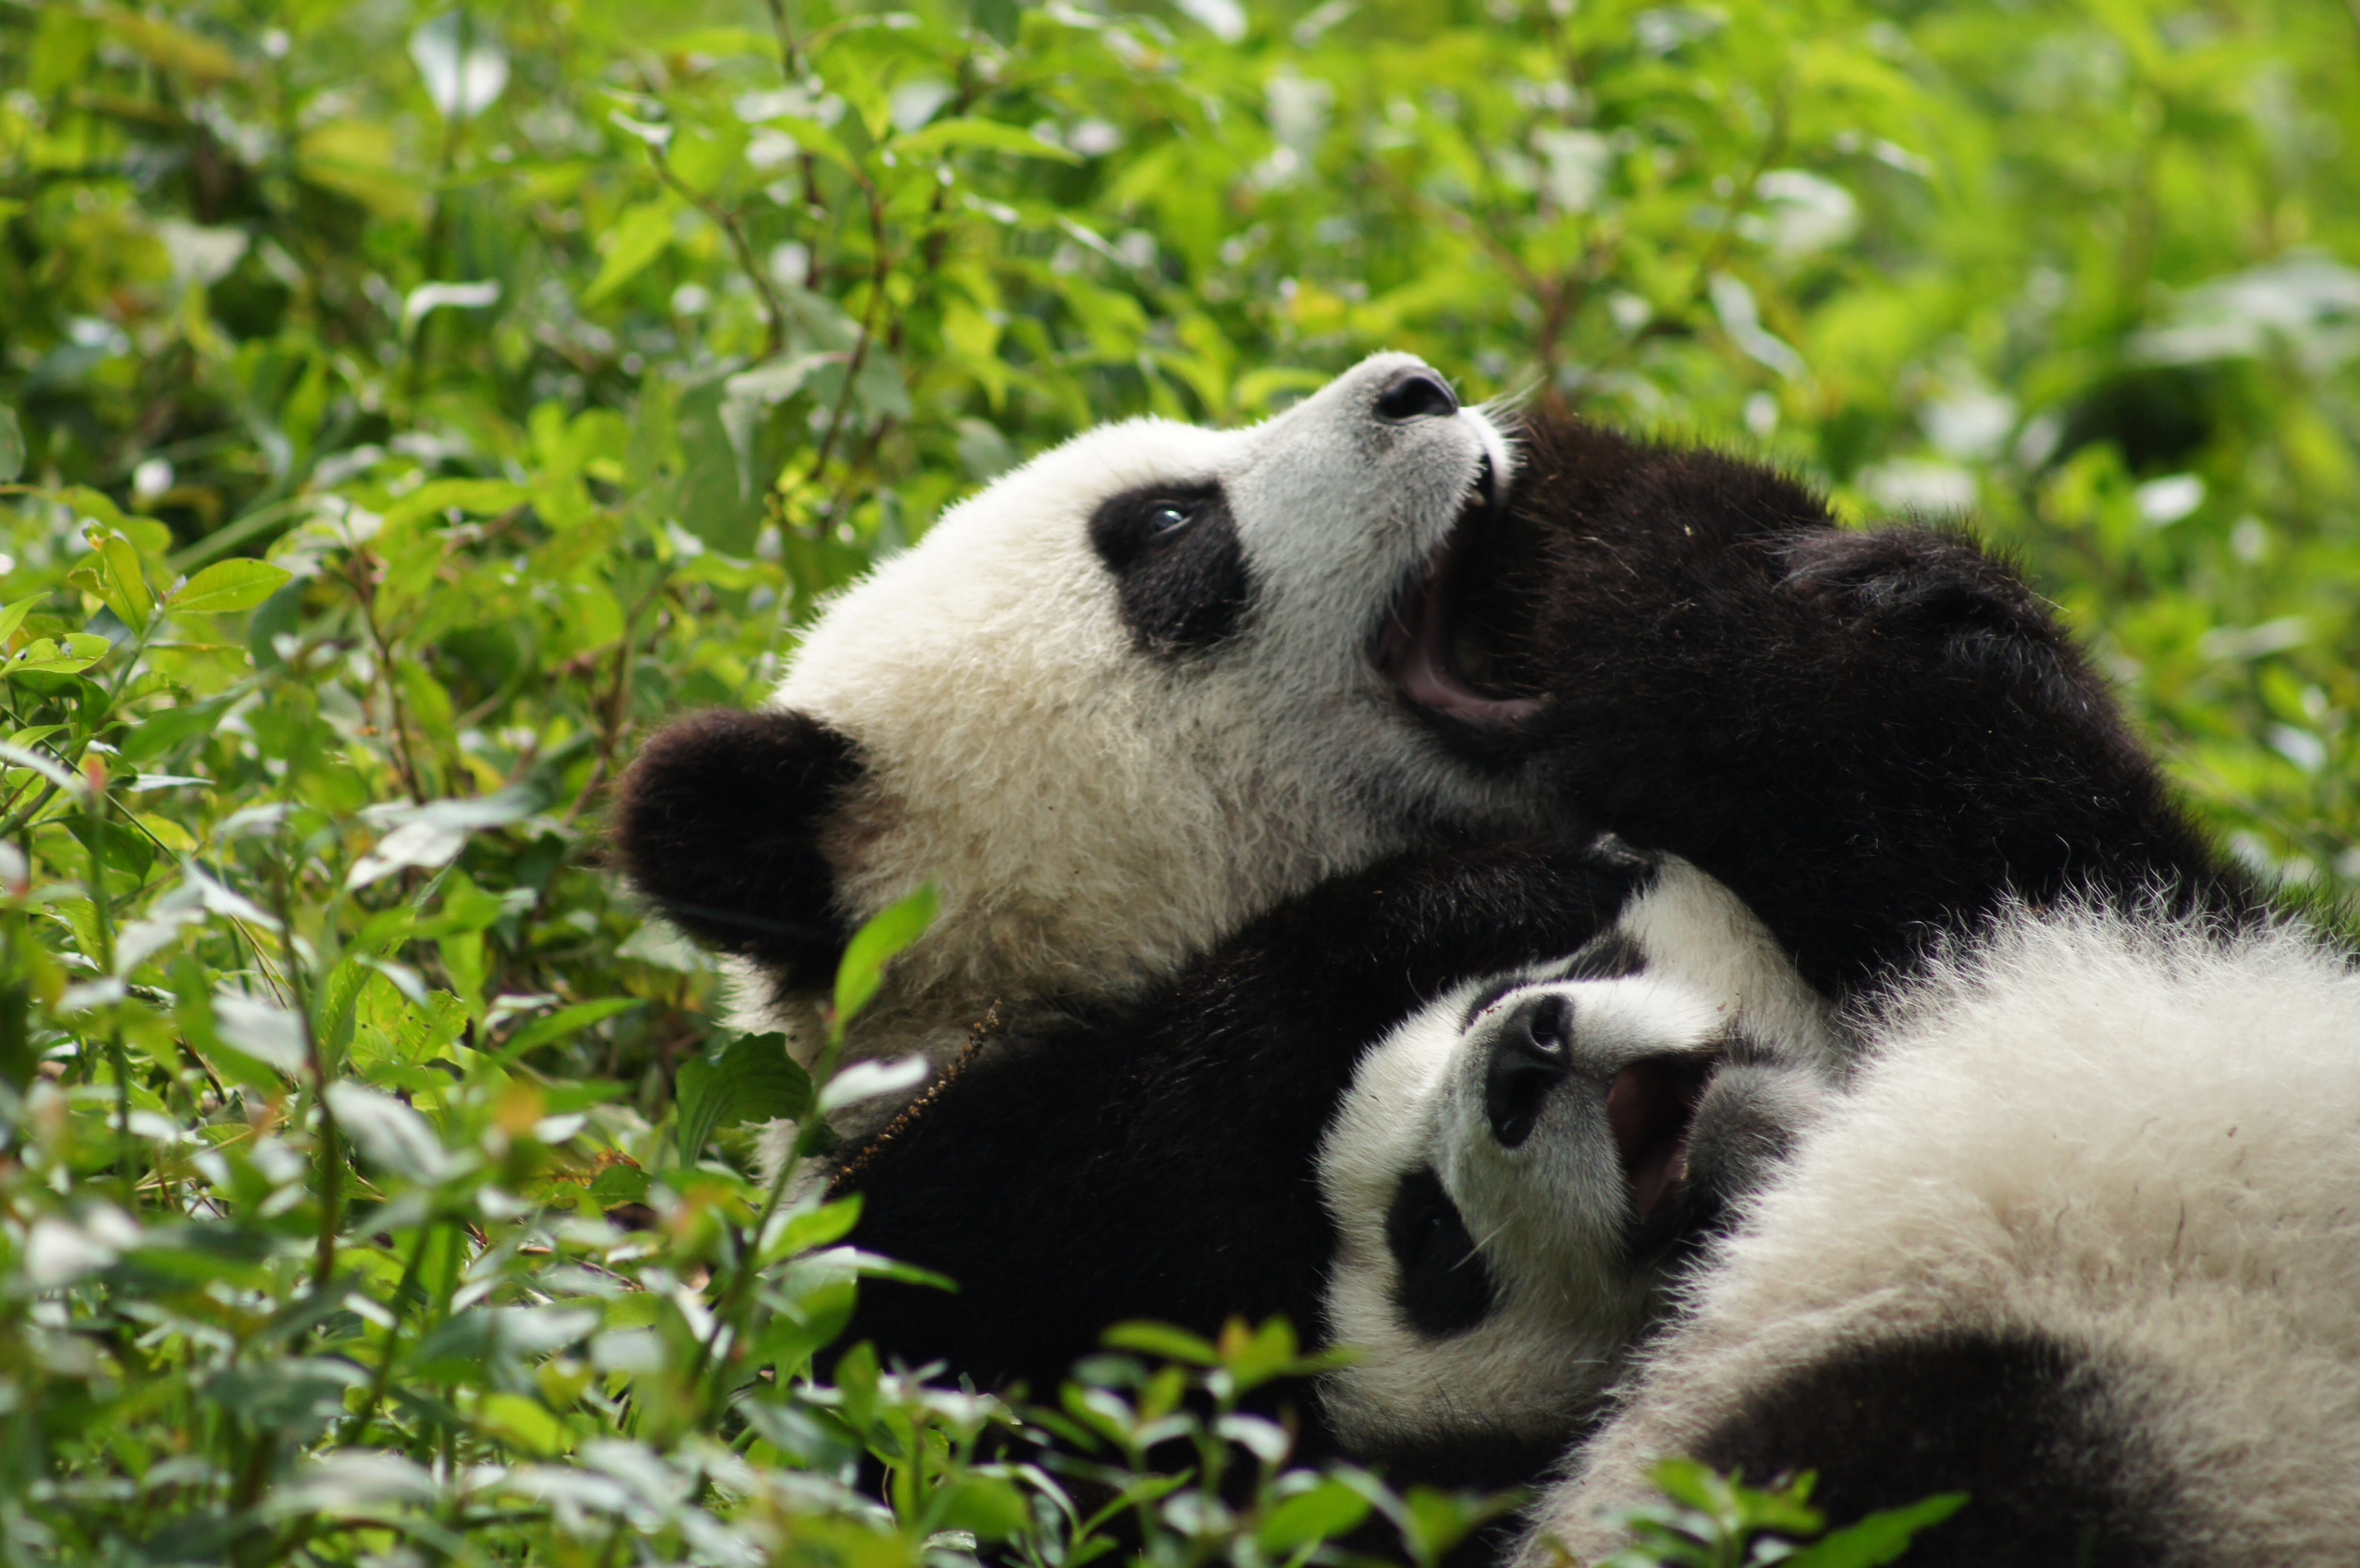 How much does a giant panda weigh at 1 year old?